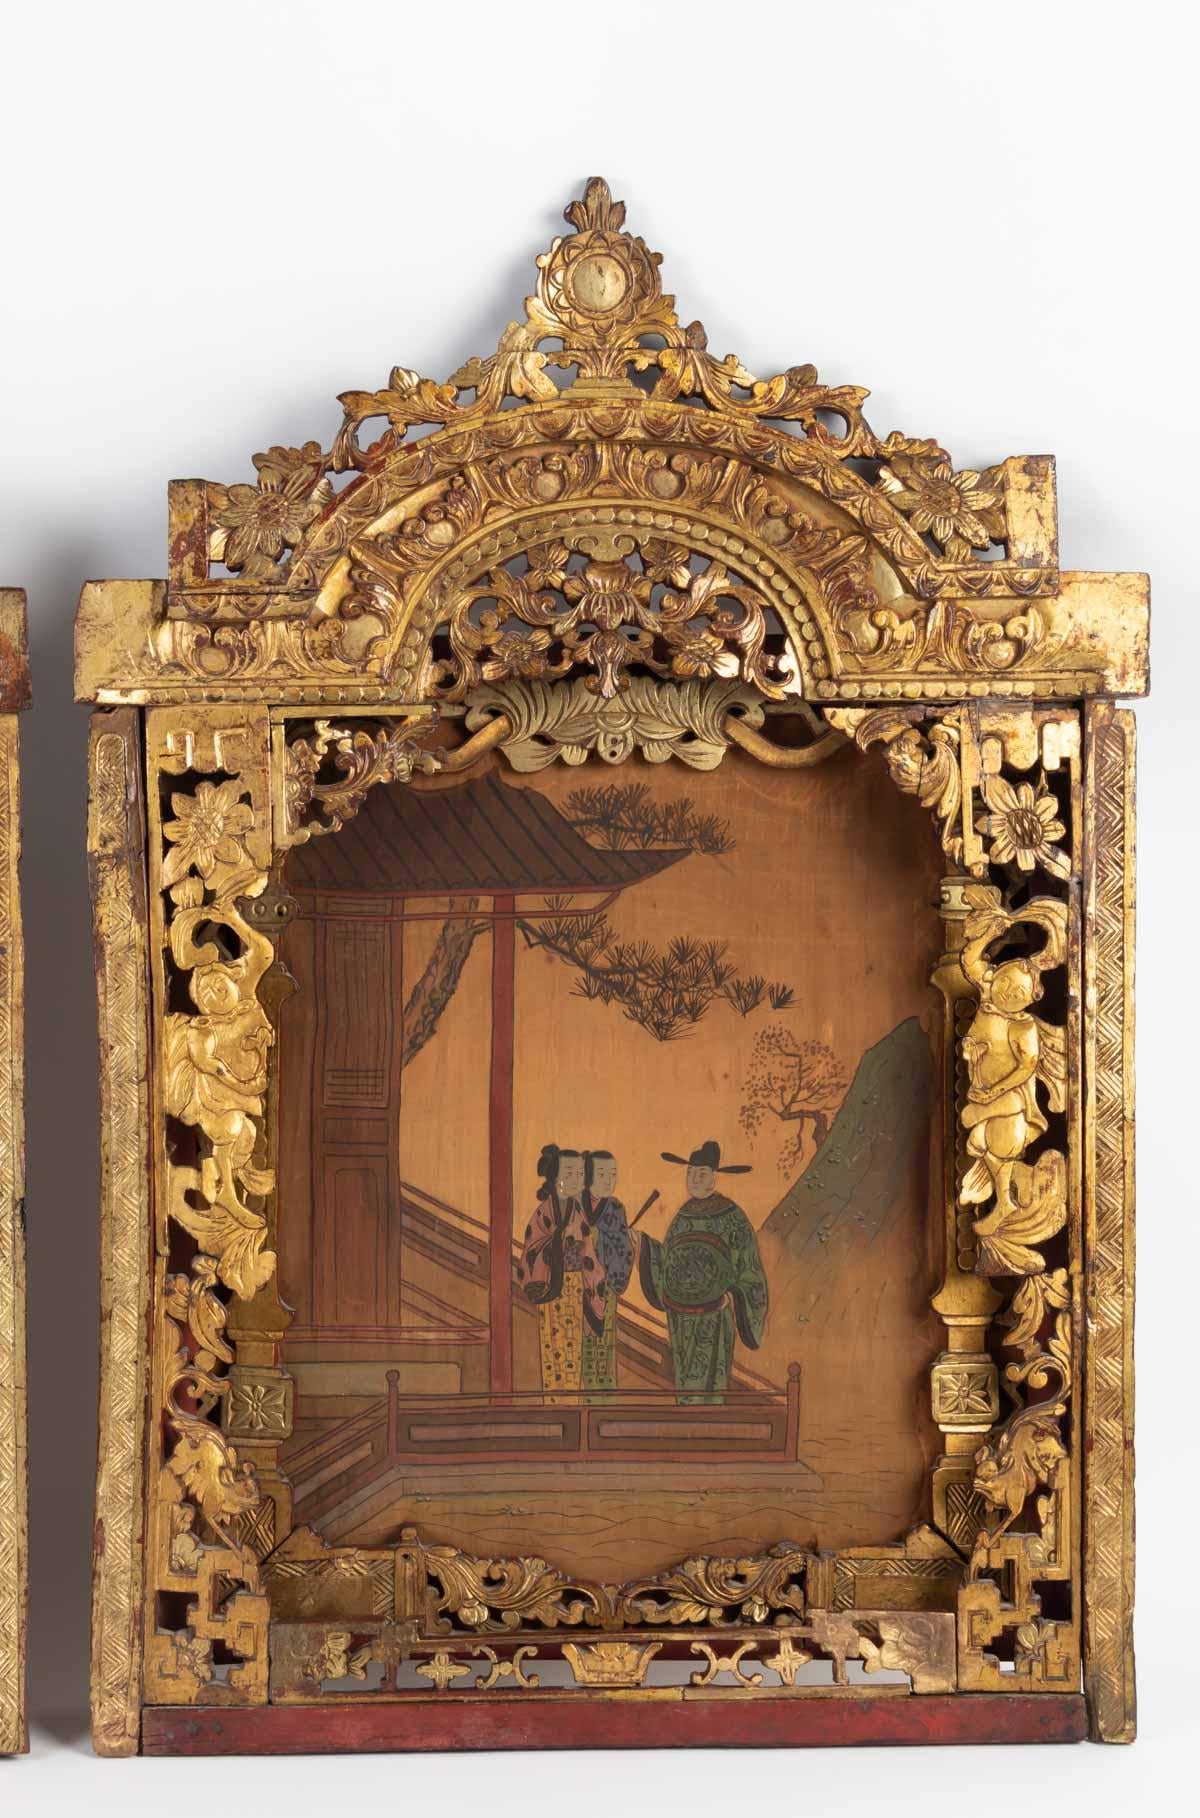 Pair of paintings, China 19th century in carved and gilded wood frames

Measures: H 70cm, W 47cm, D 7cm.